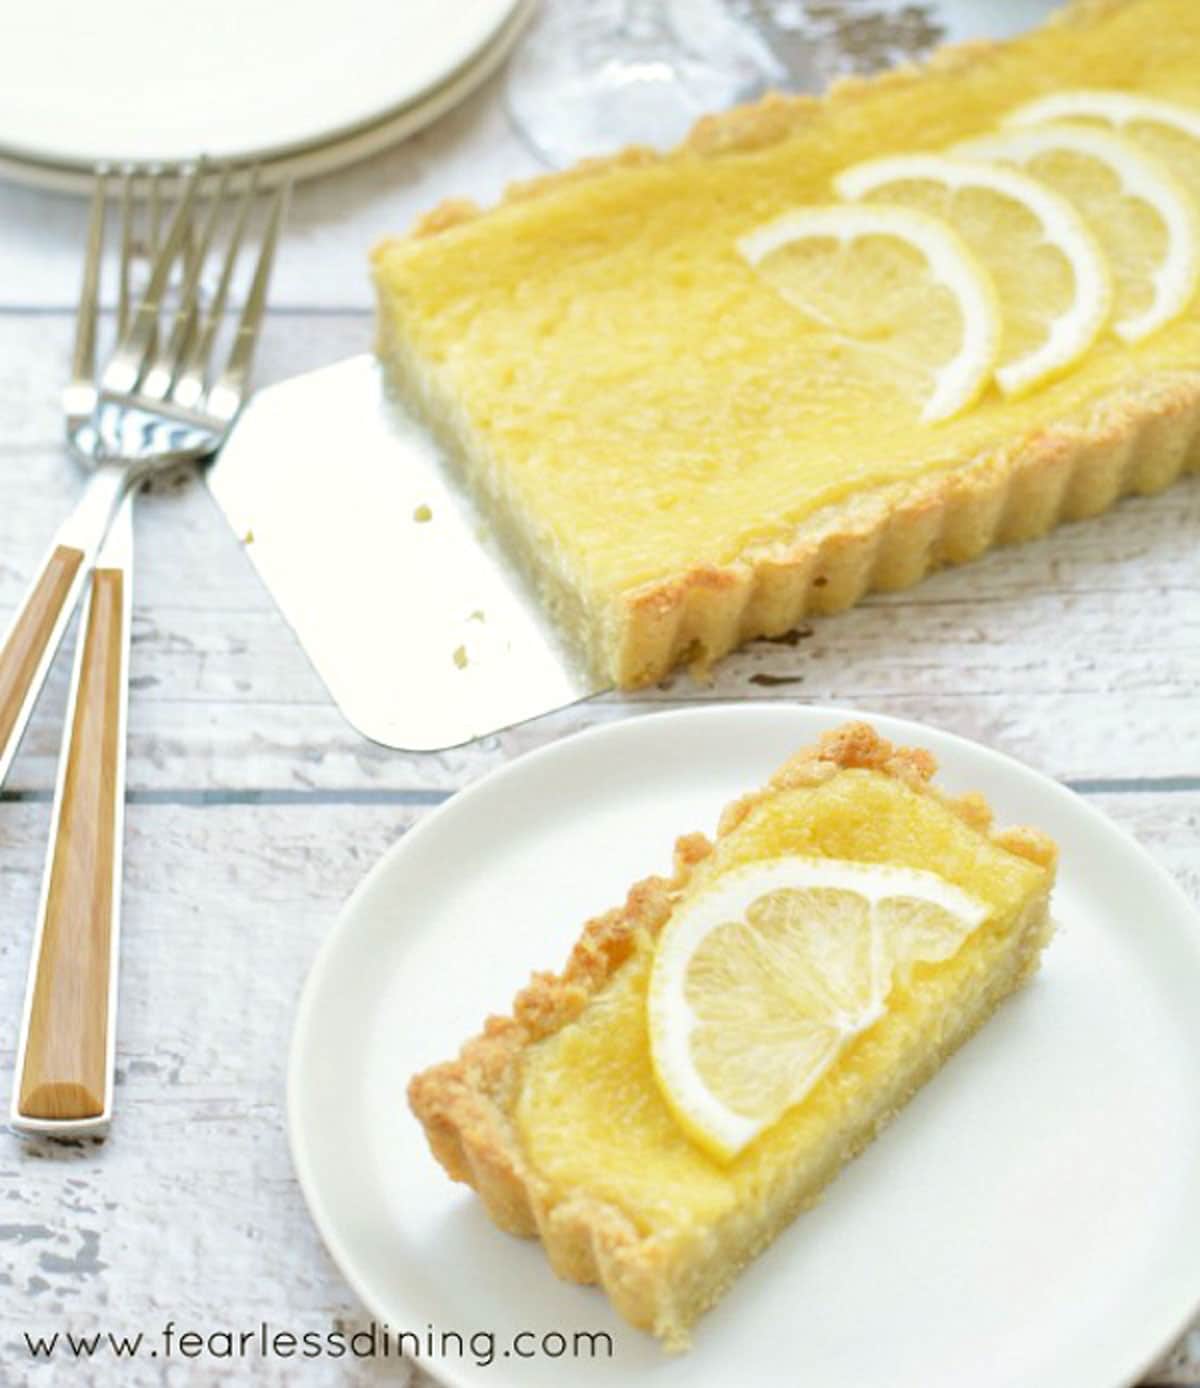 A slice of lemon tart on a white plate next to the whole tart.